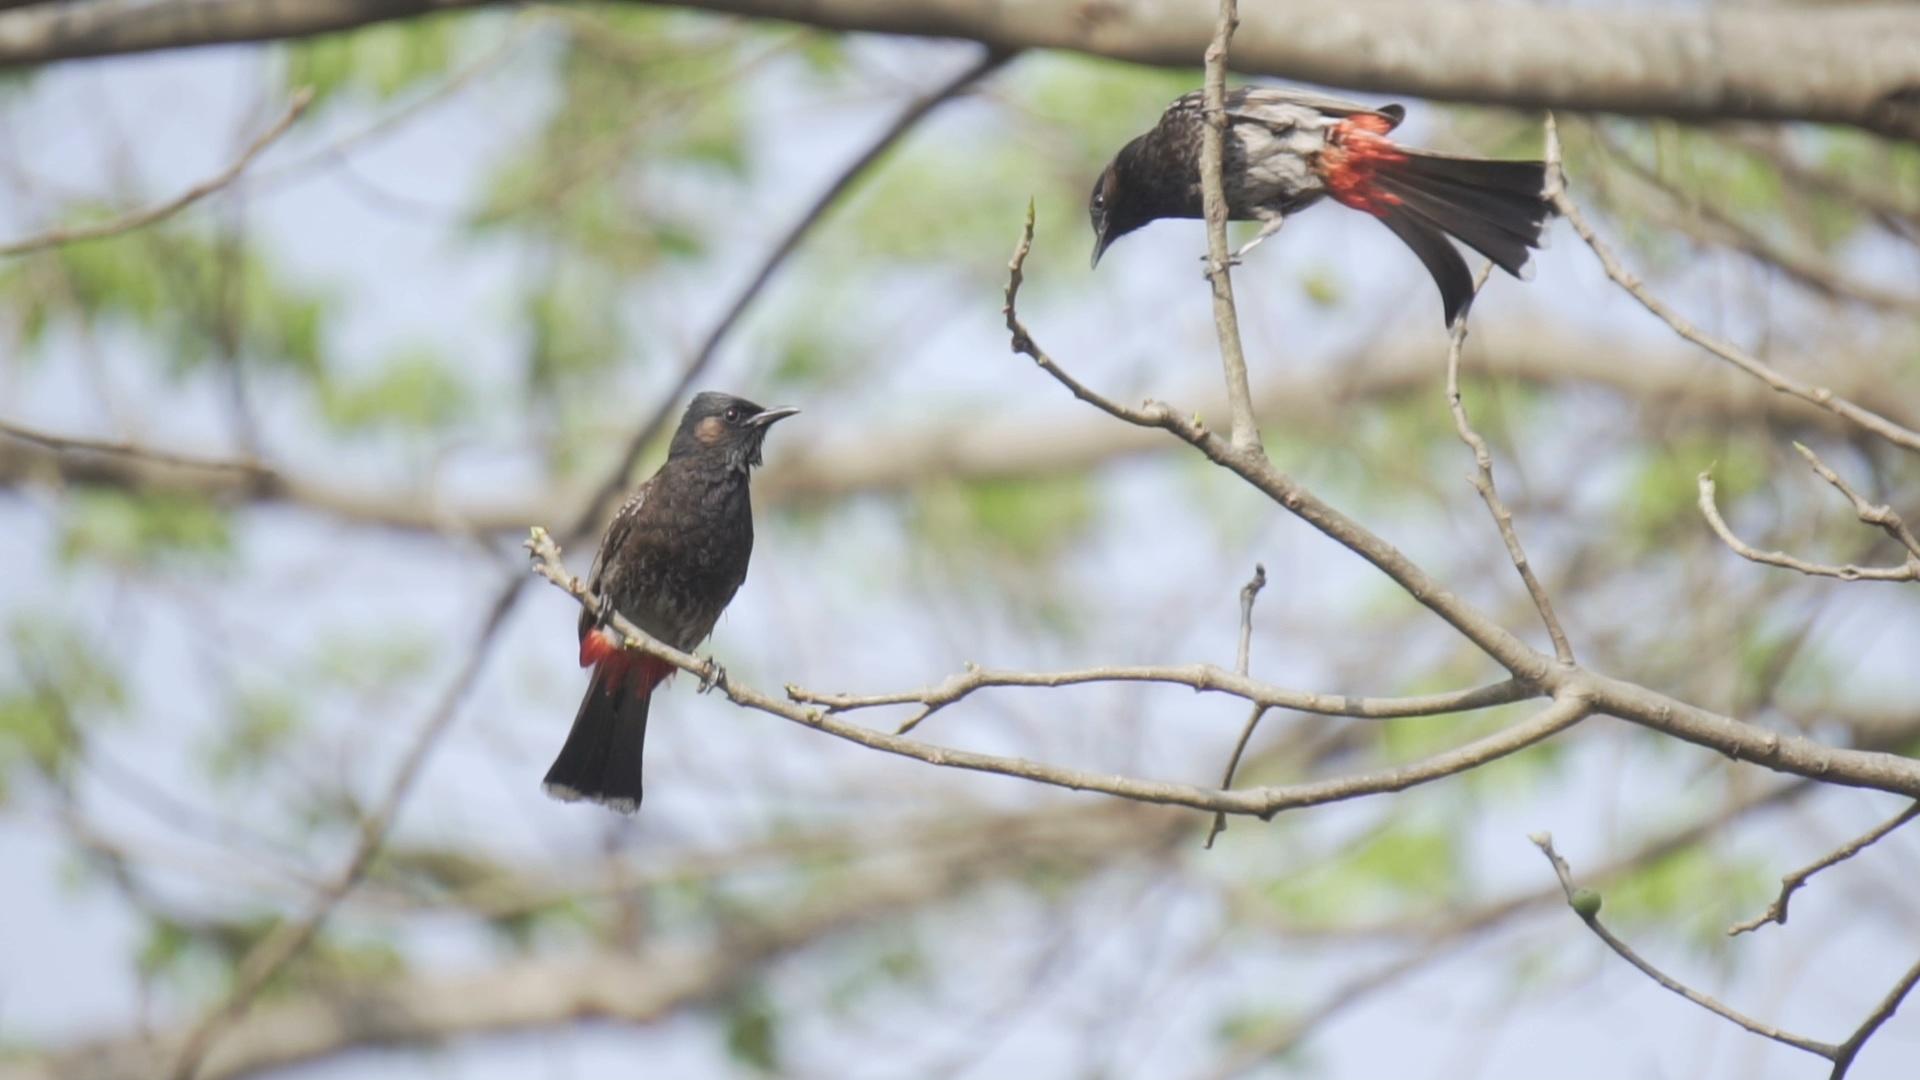 Two Red Vented Bulbuls Interacting with each other in slow motion